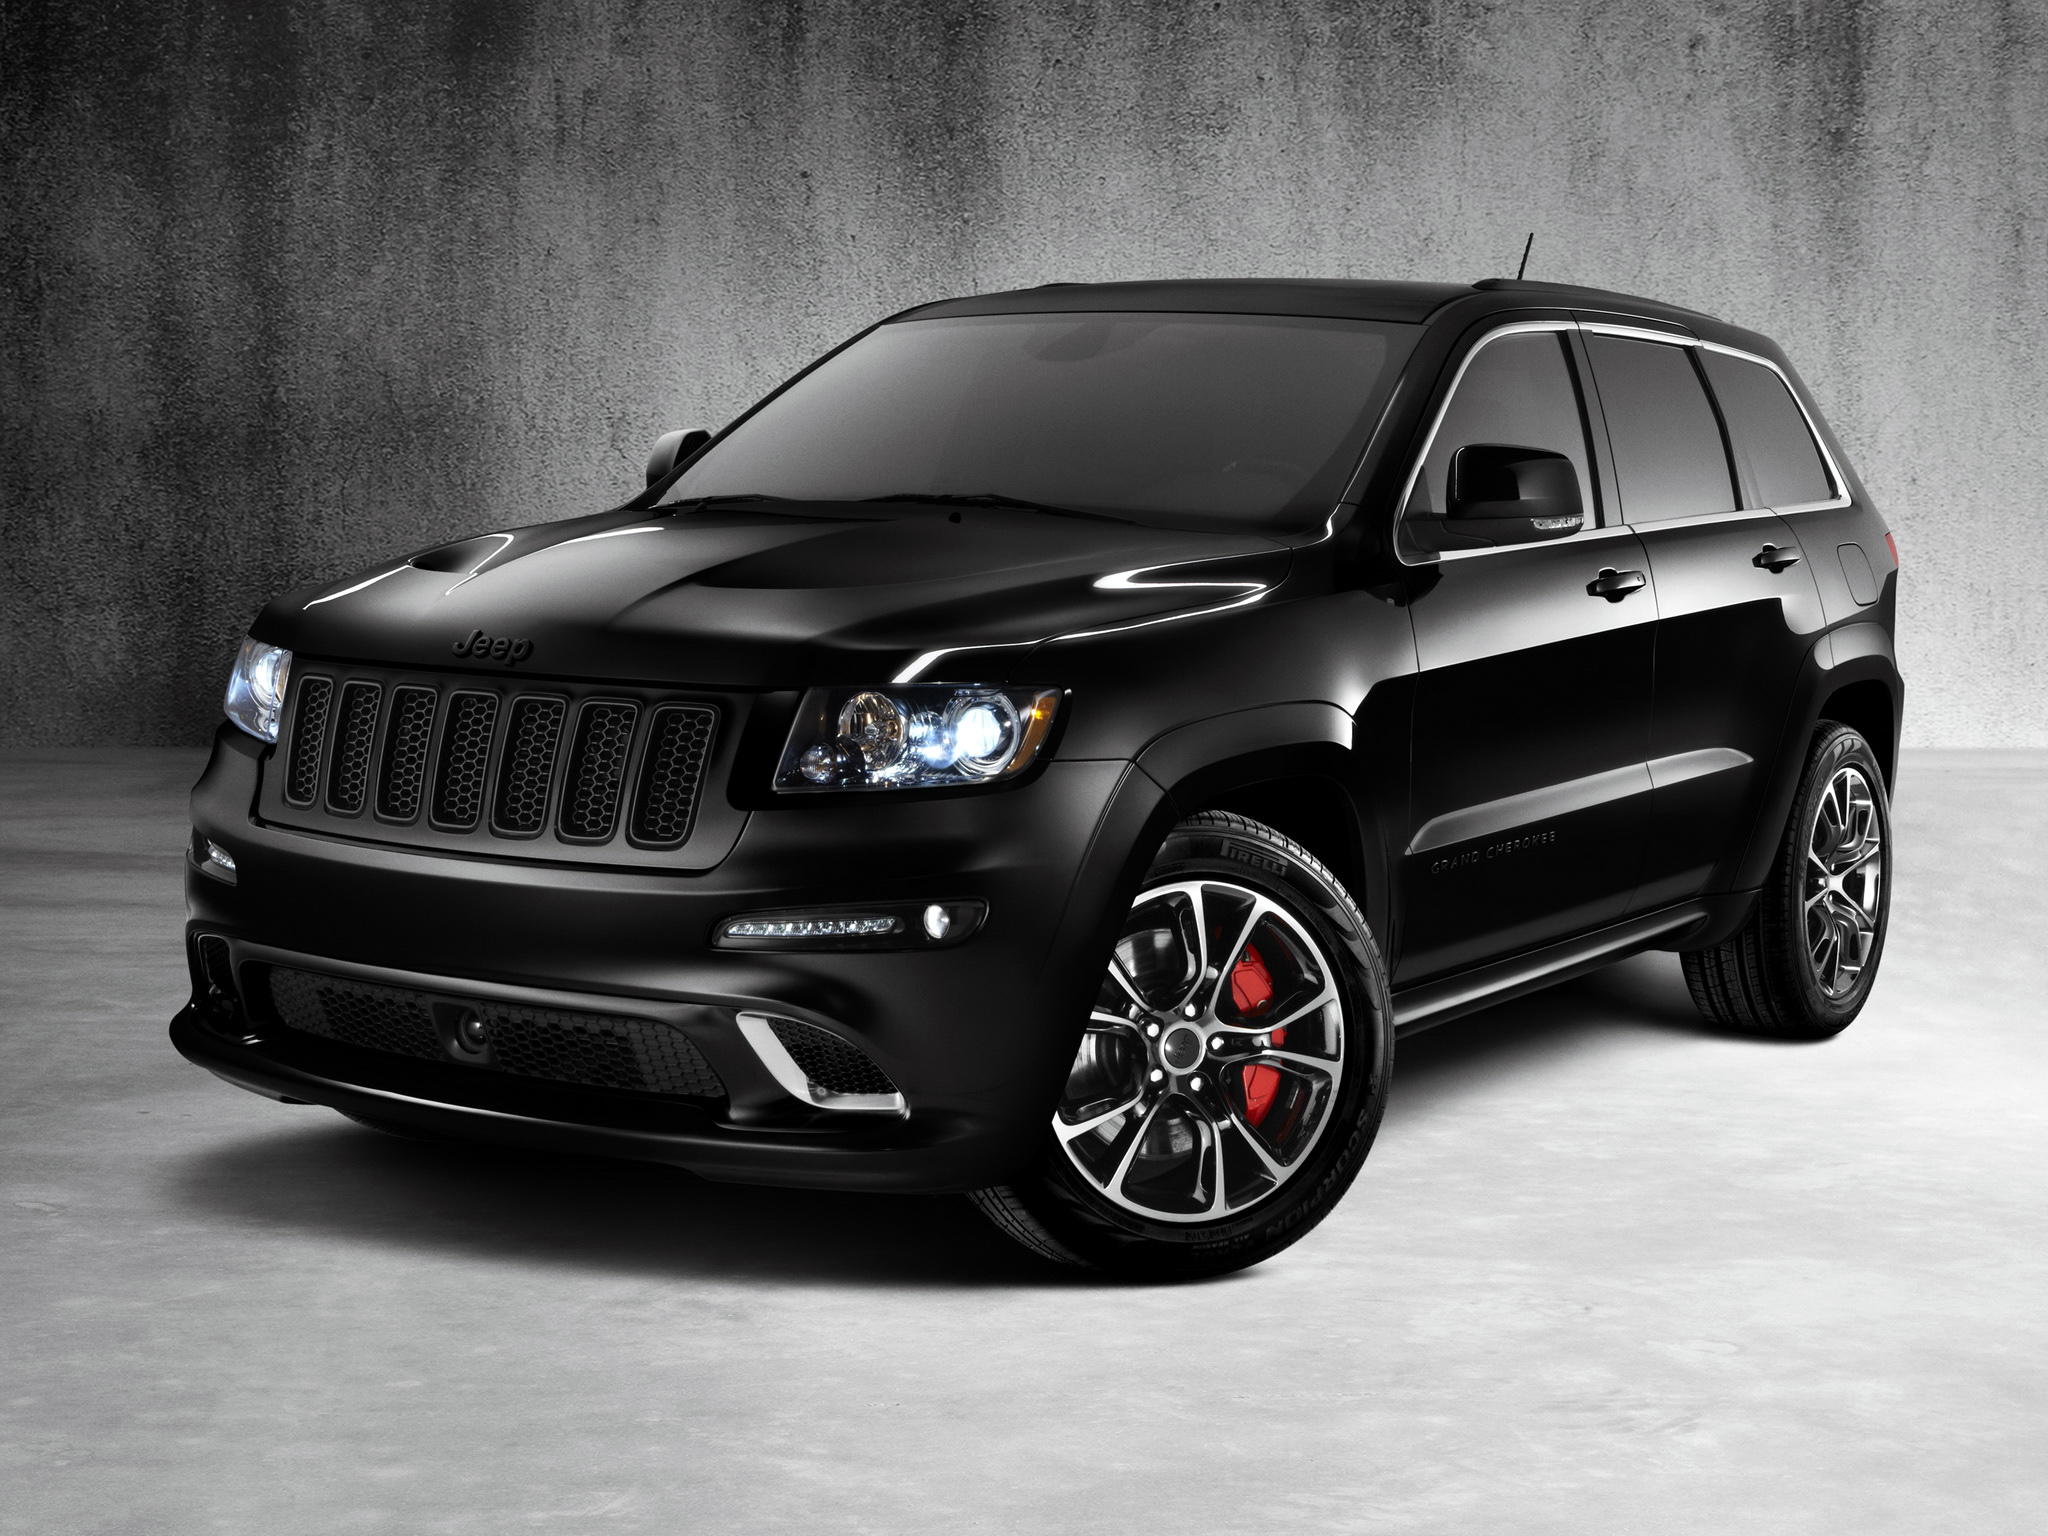 srt8, grand cherokee, cars, jeep collection of HD images